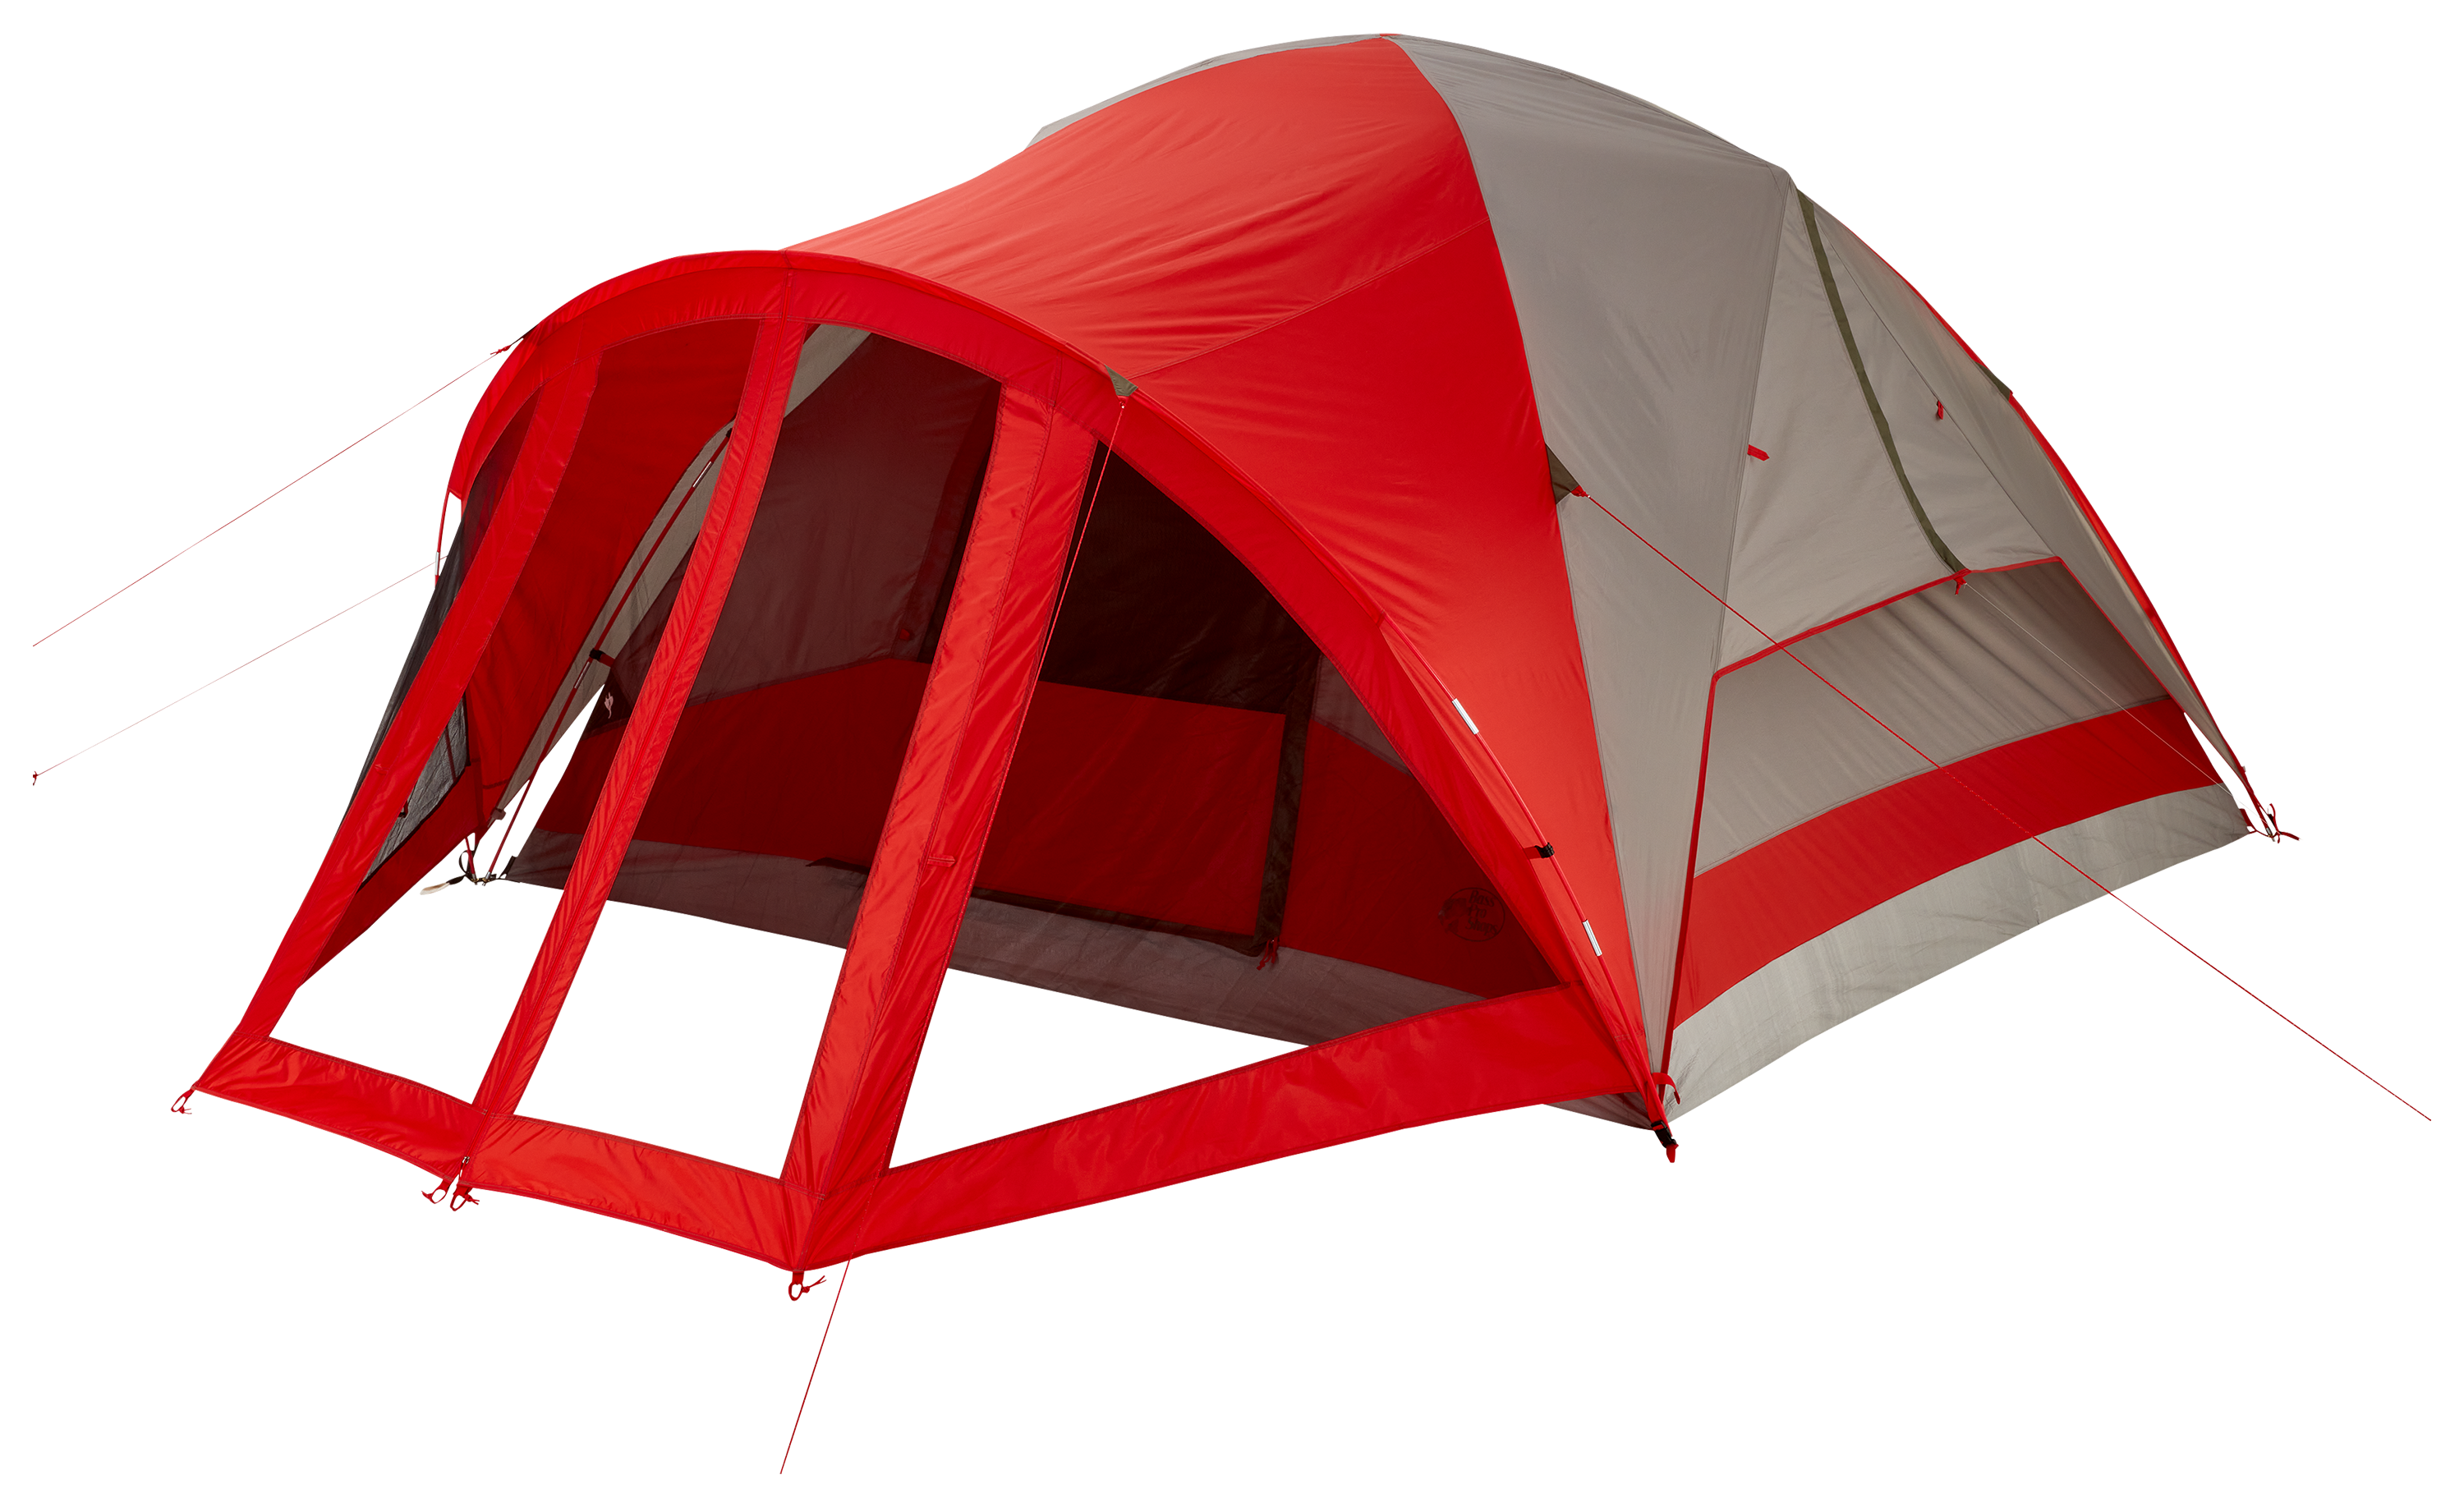 Bass Pro Shops 6-Person Dome Tent with Screen Porch